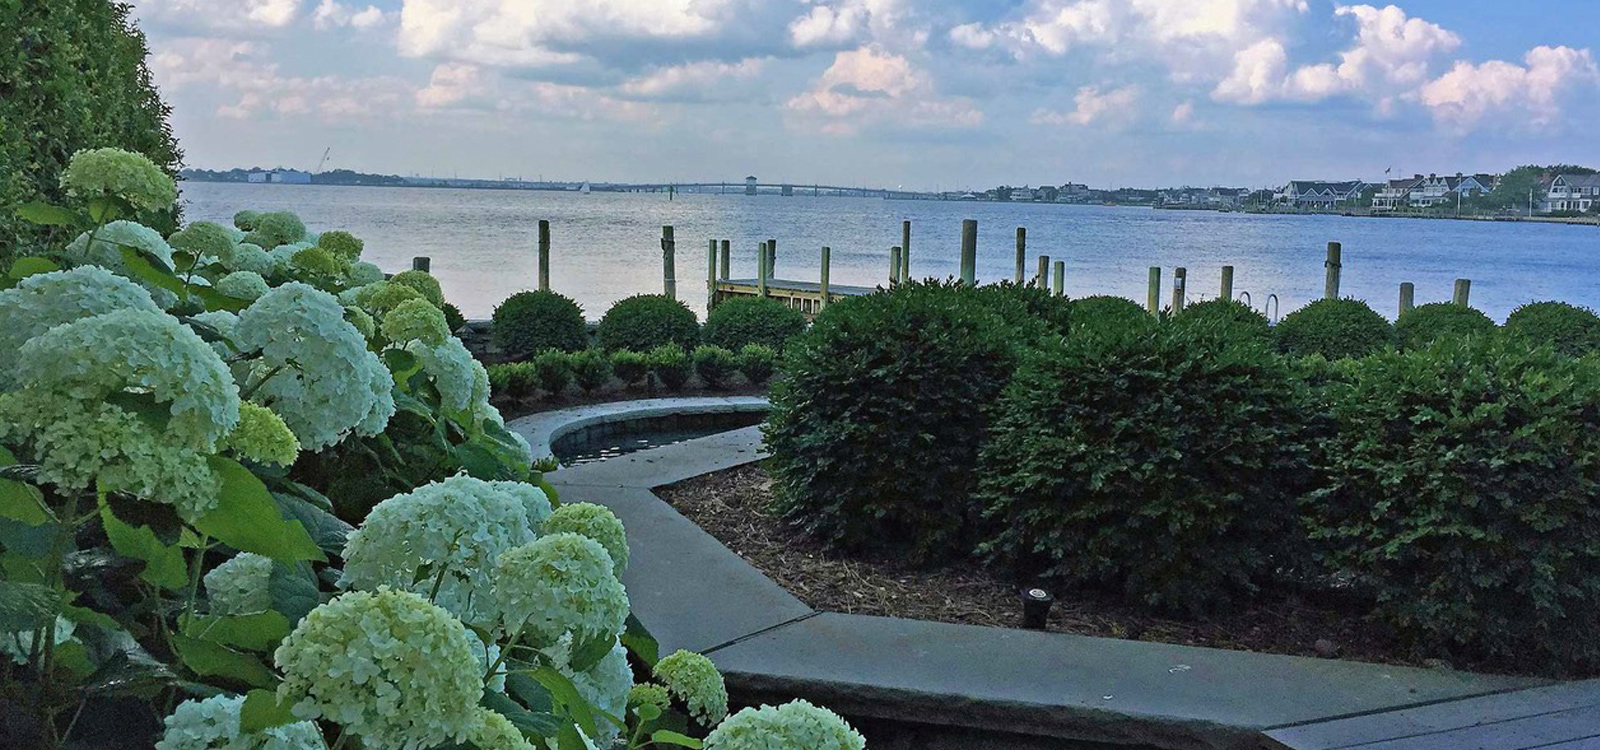 flowers by the ocean in new jersey